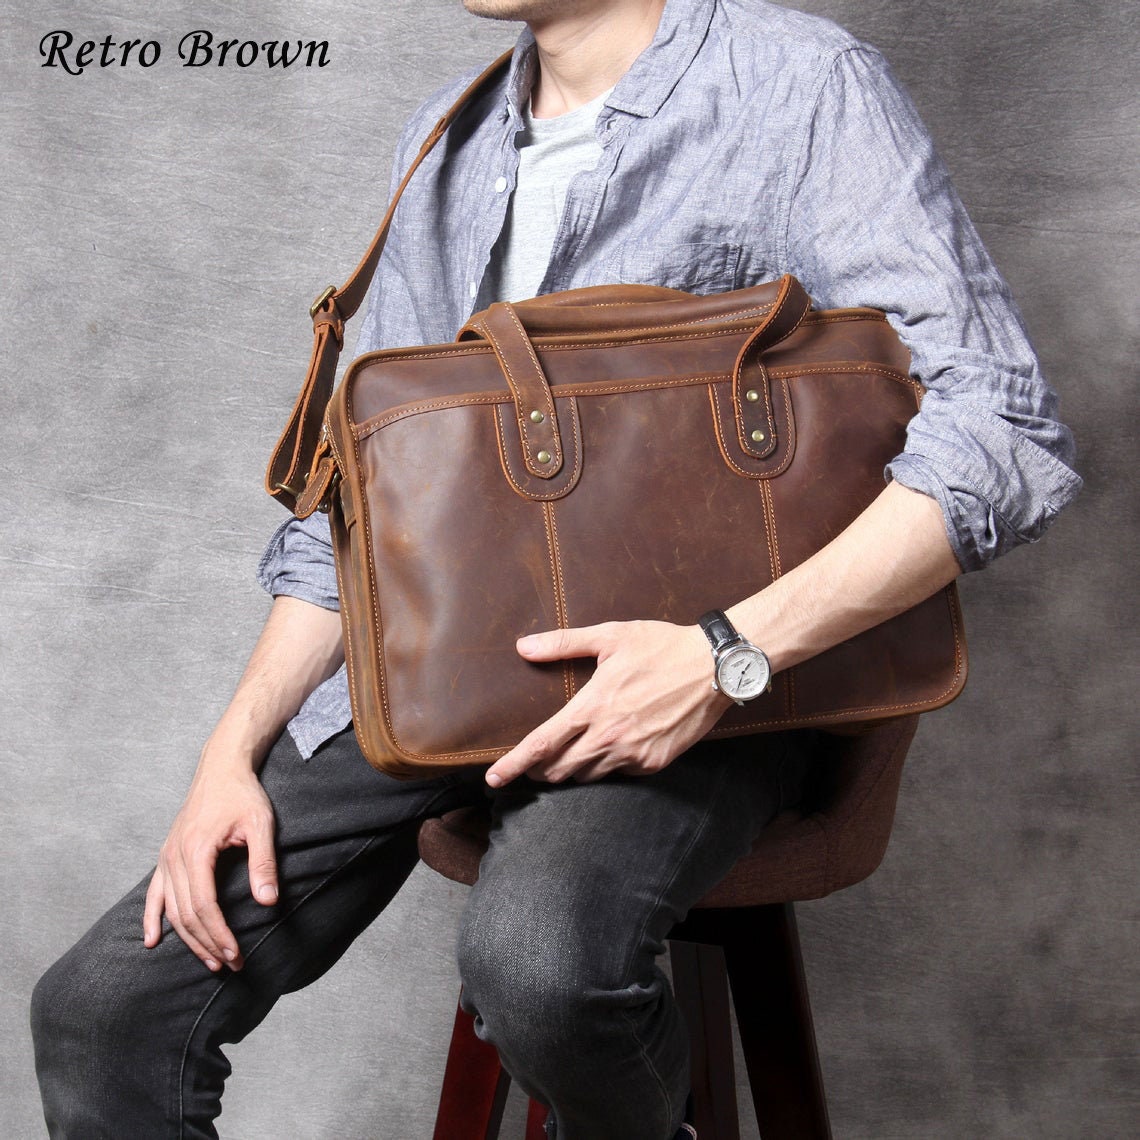 Leather Zip-Top Briefcase - Handmade Leather Briefcase